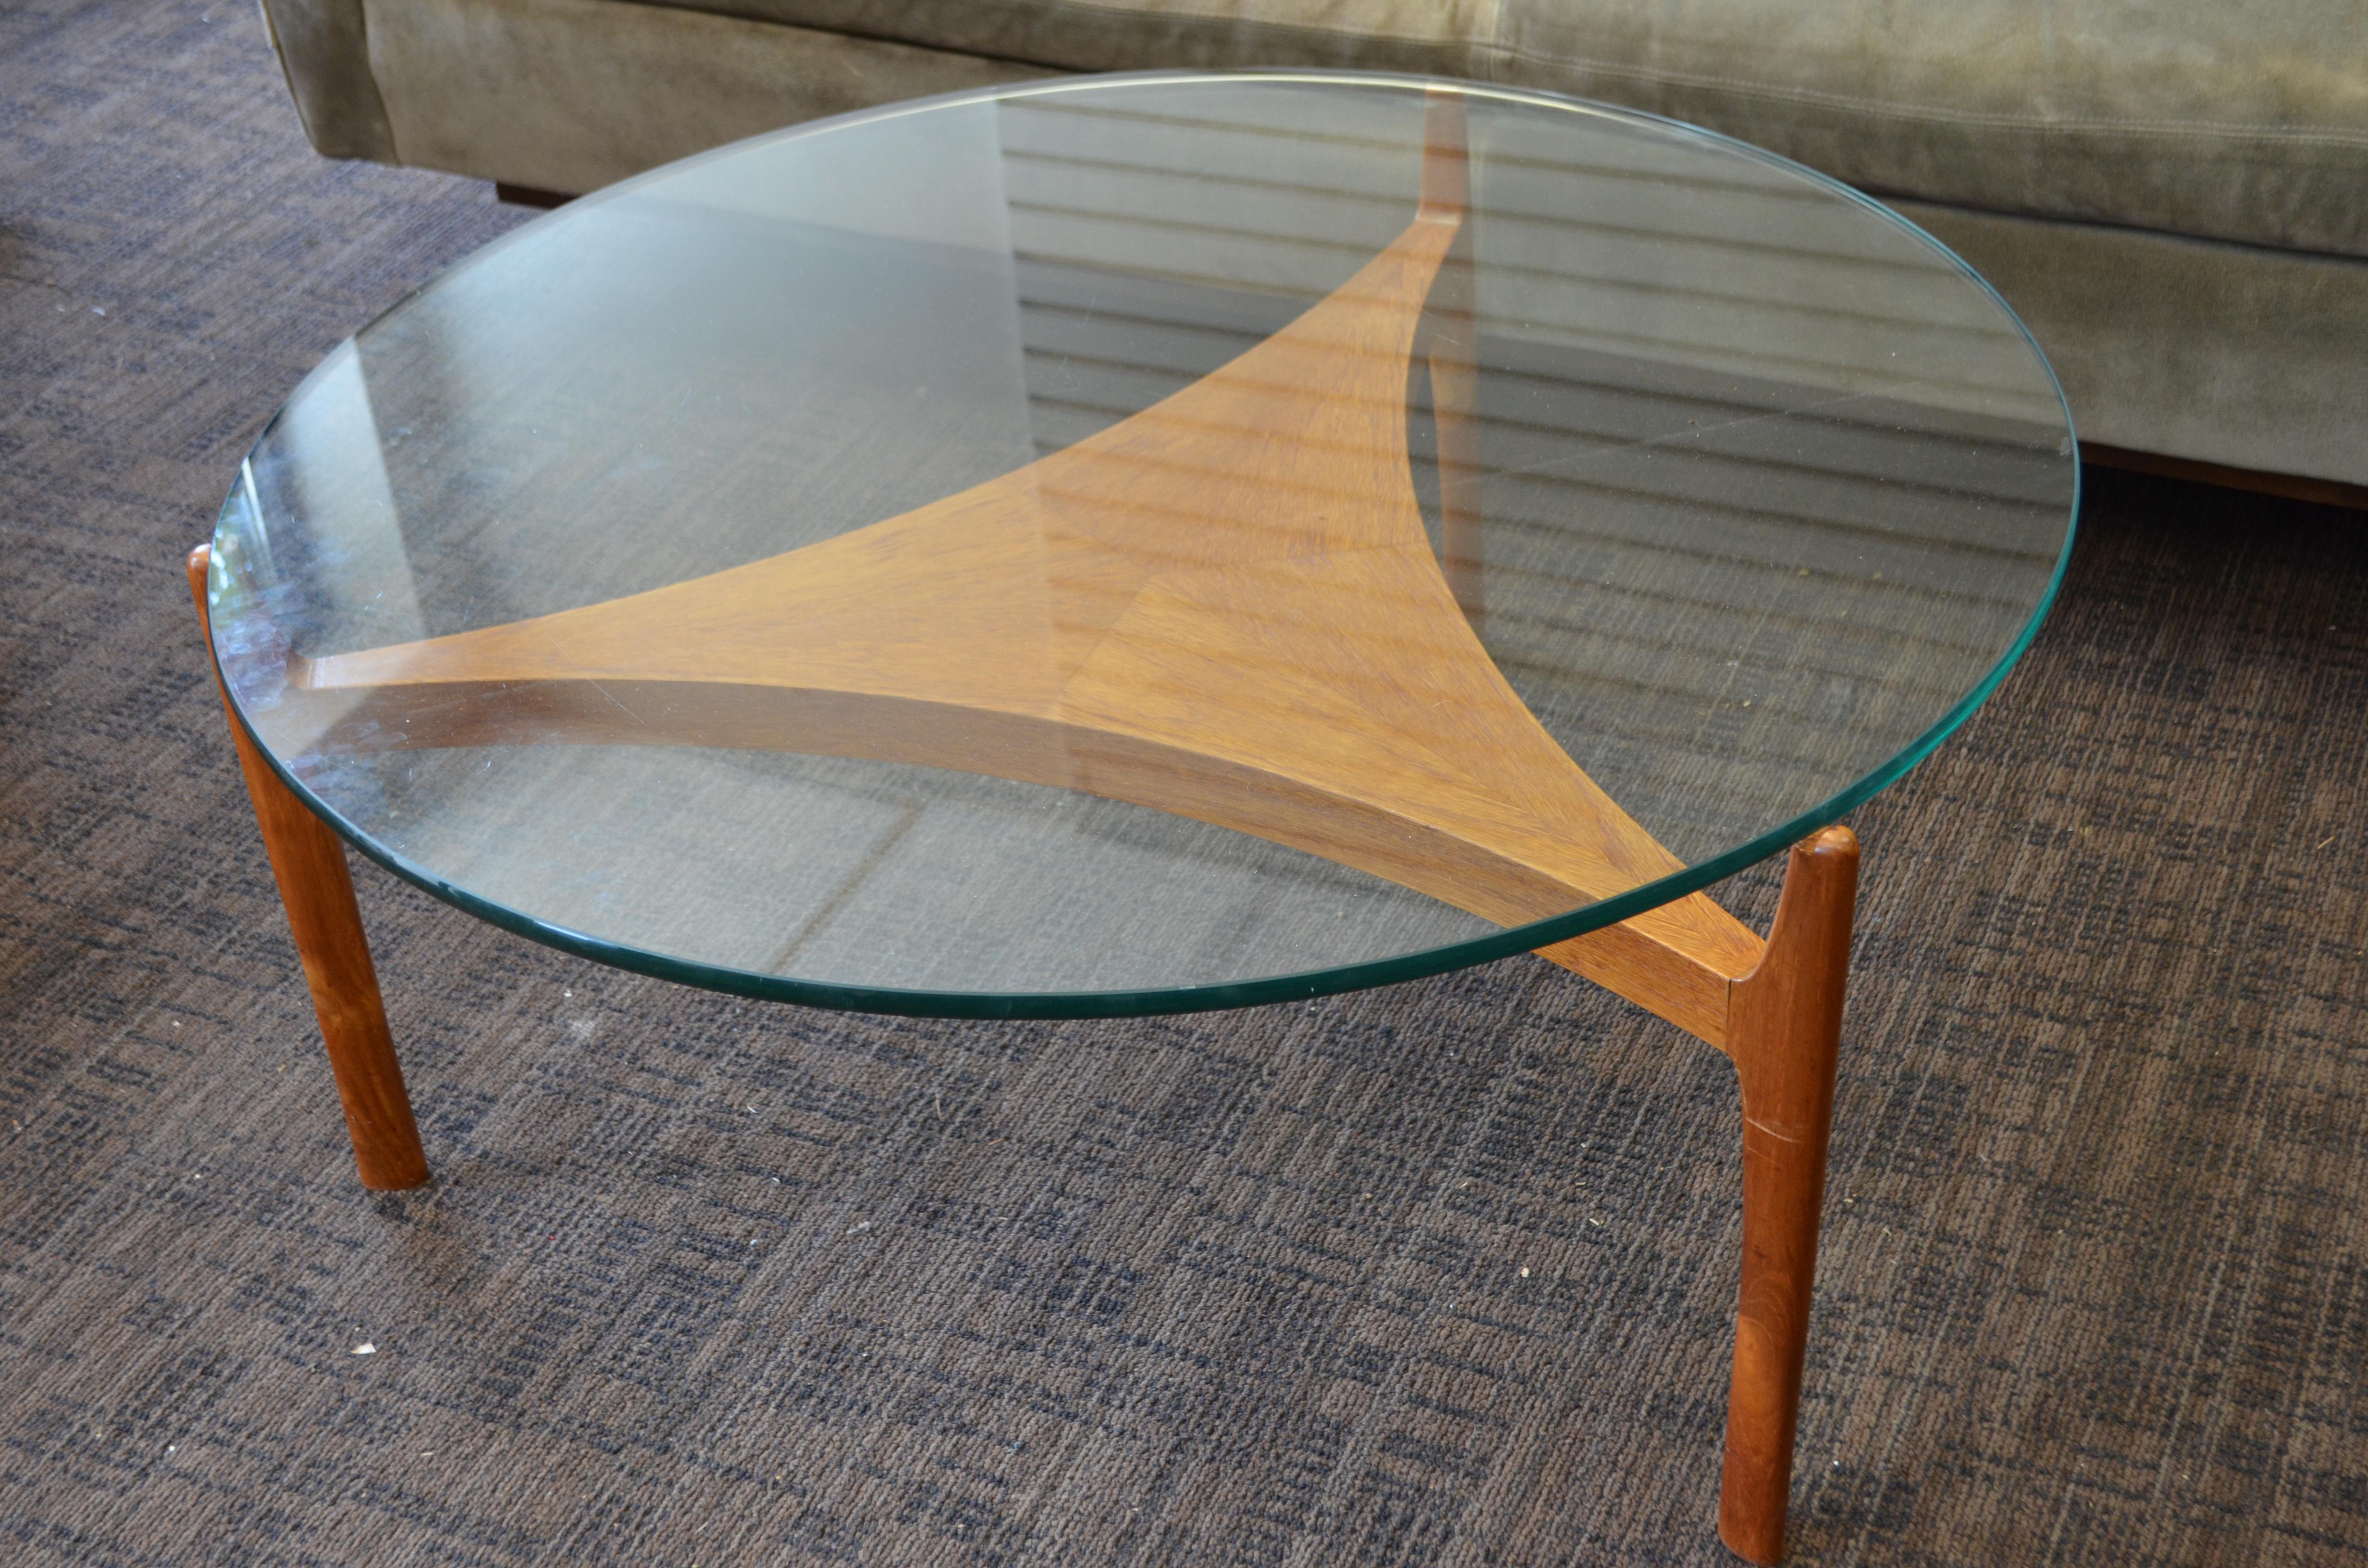 Midcentury coffee table, low table with triangular teak base and glass top. Designed by Sven Ellekaer of Denmark. Glass top notches neatly into the triangular teak base with its book-matched parquetry center. Shows through the glass with a